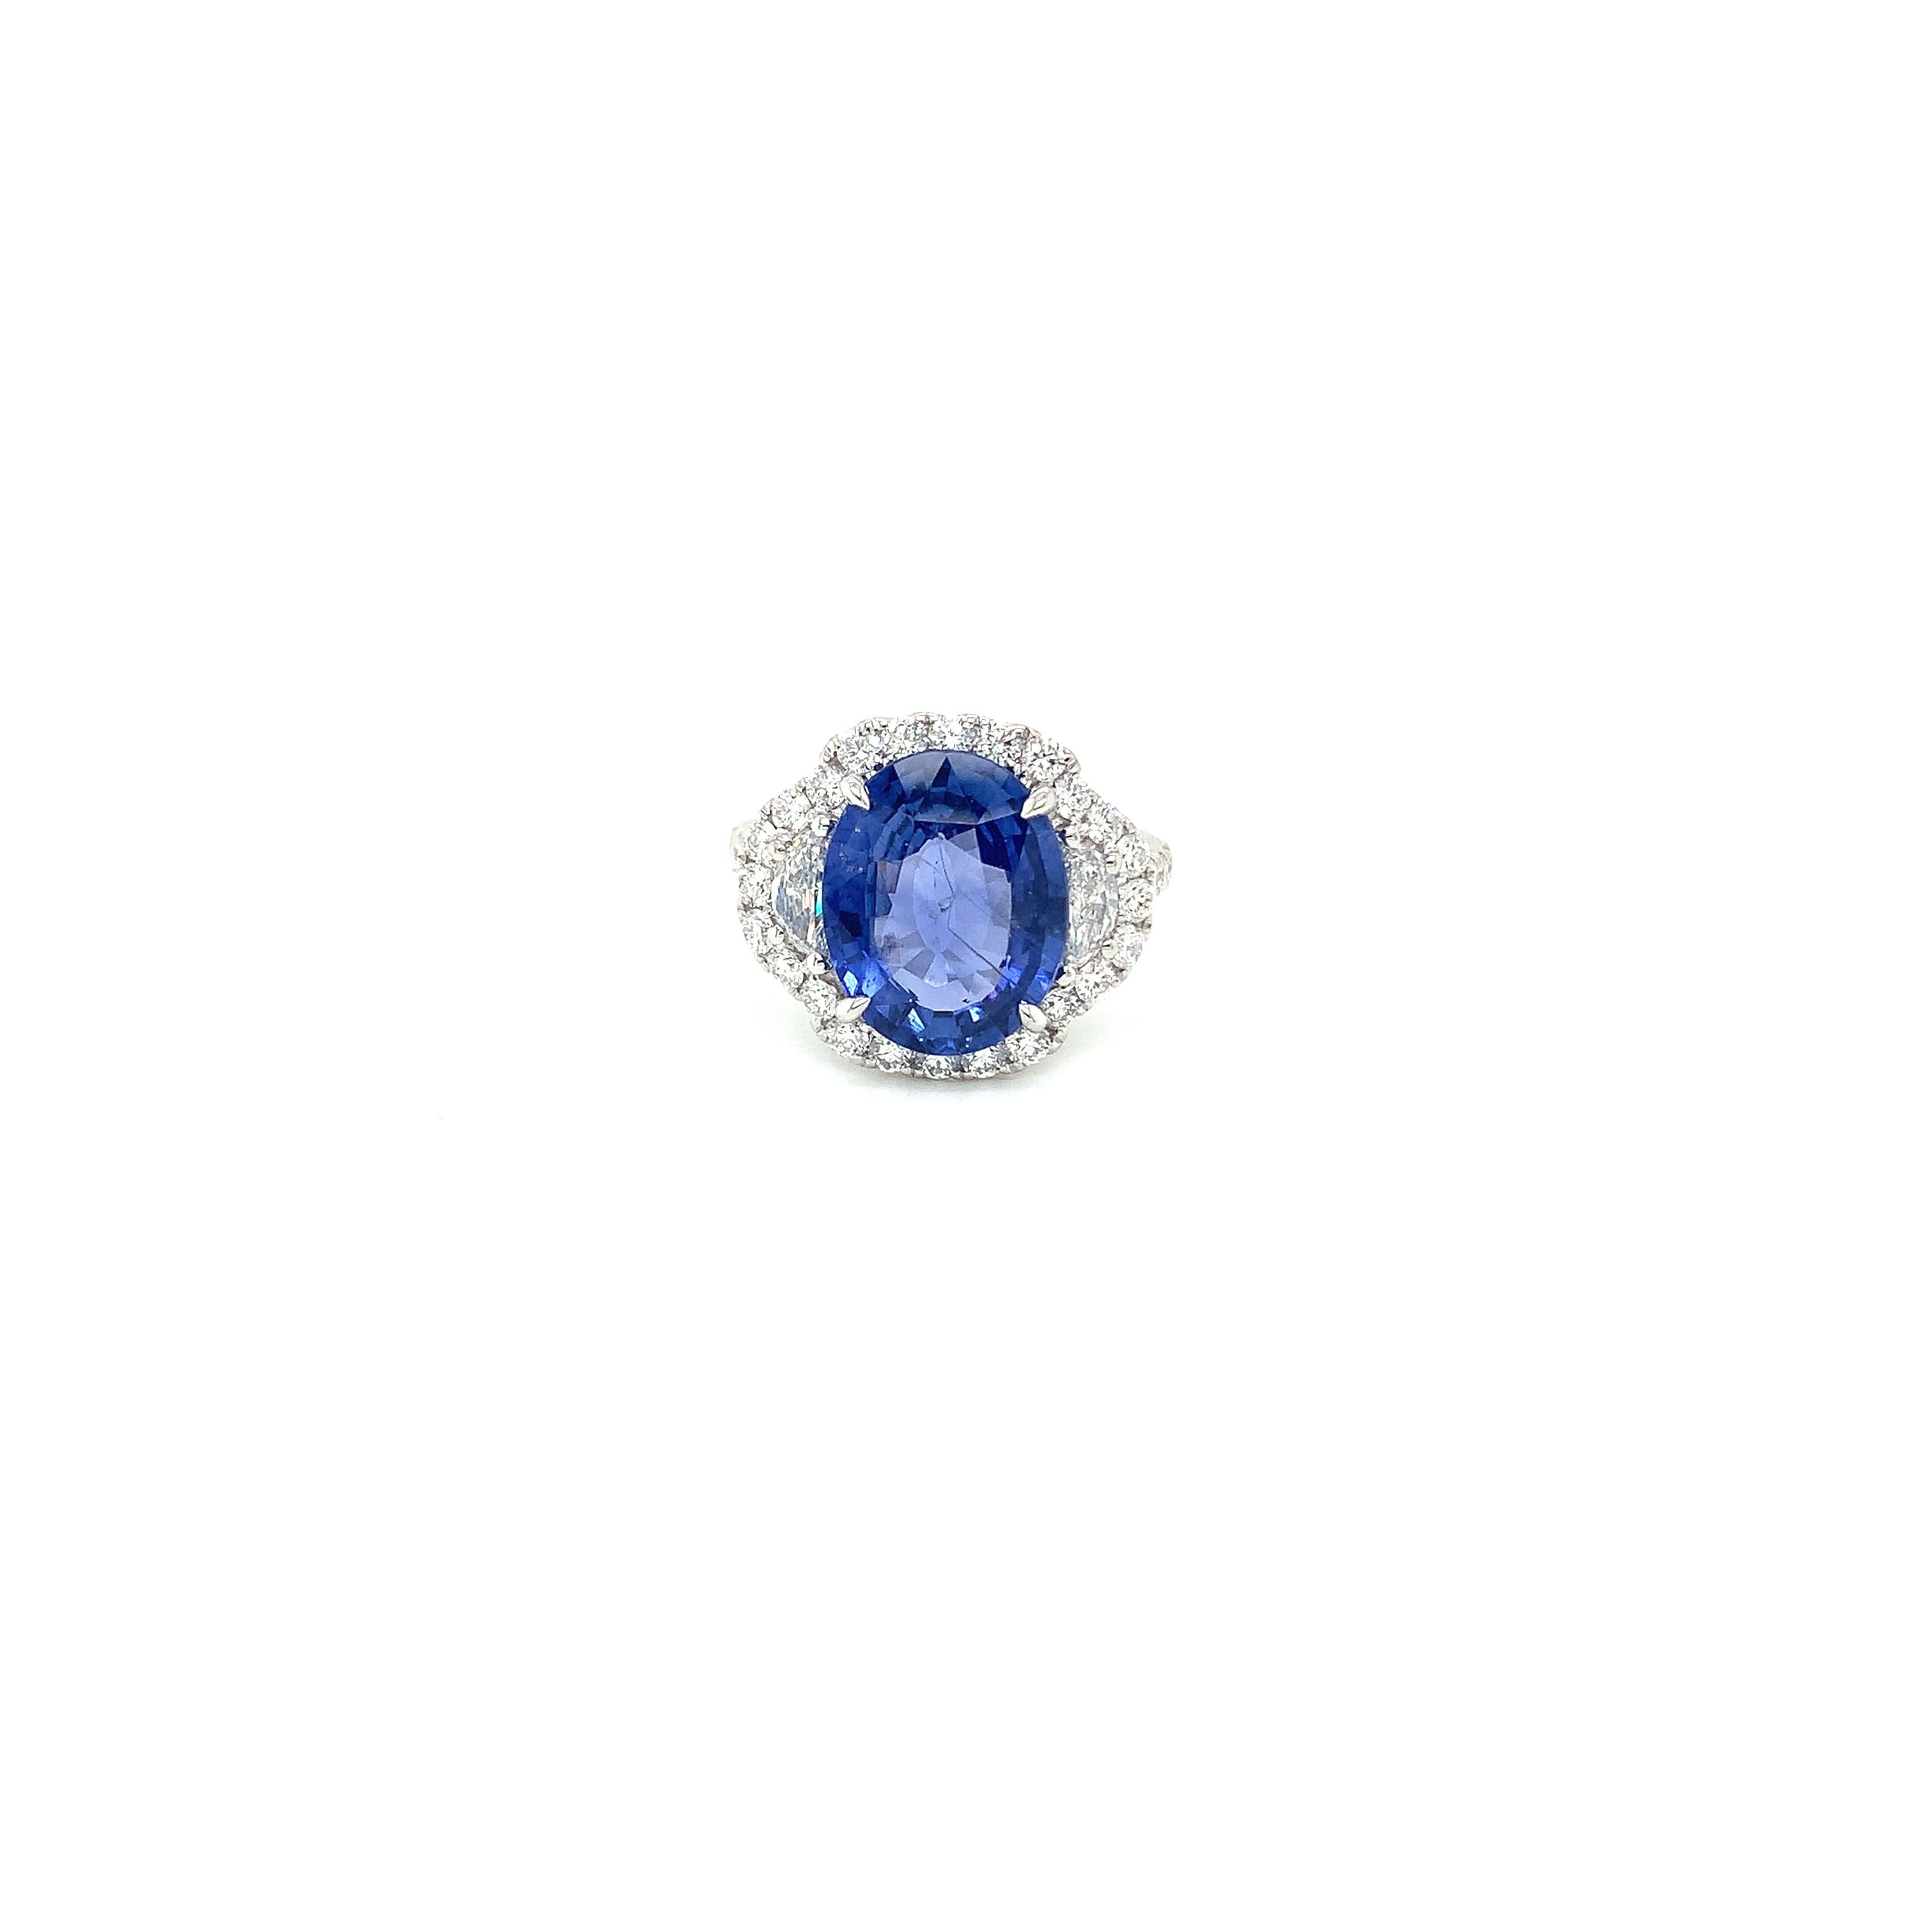 Oval blue sapphire weighing 5.86 cts
Measuring (12.7x10.3) mm
Half moon diamonds weighing .39 cts
34 round diamonds weighing .83 cts
Set in 18k white gold ring
5.08 grams